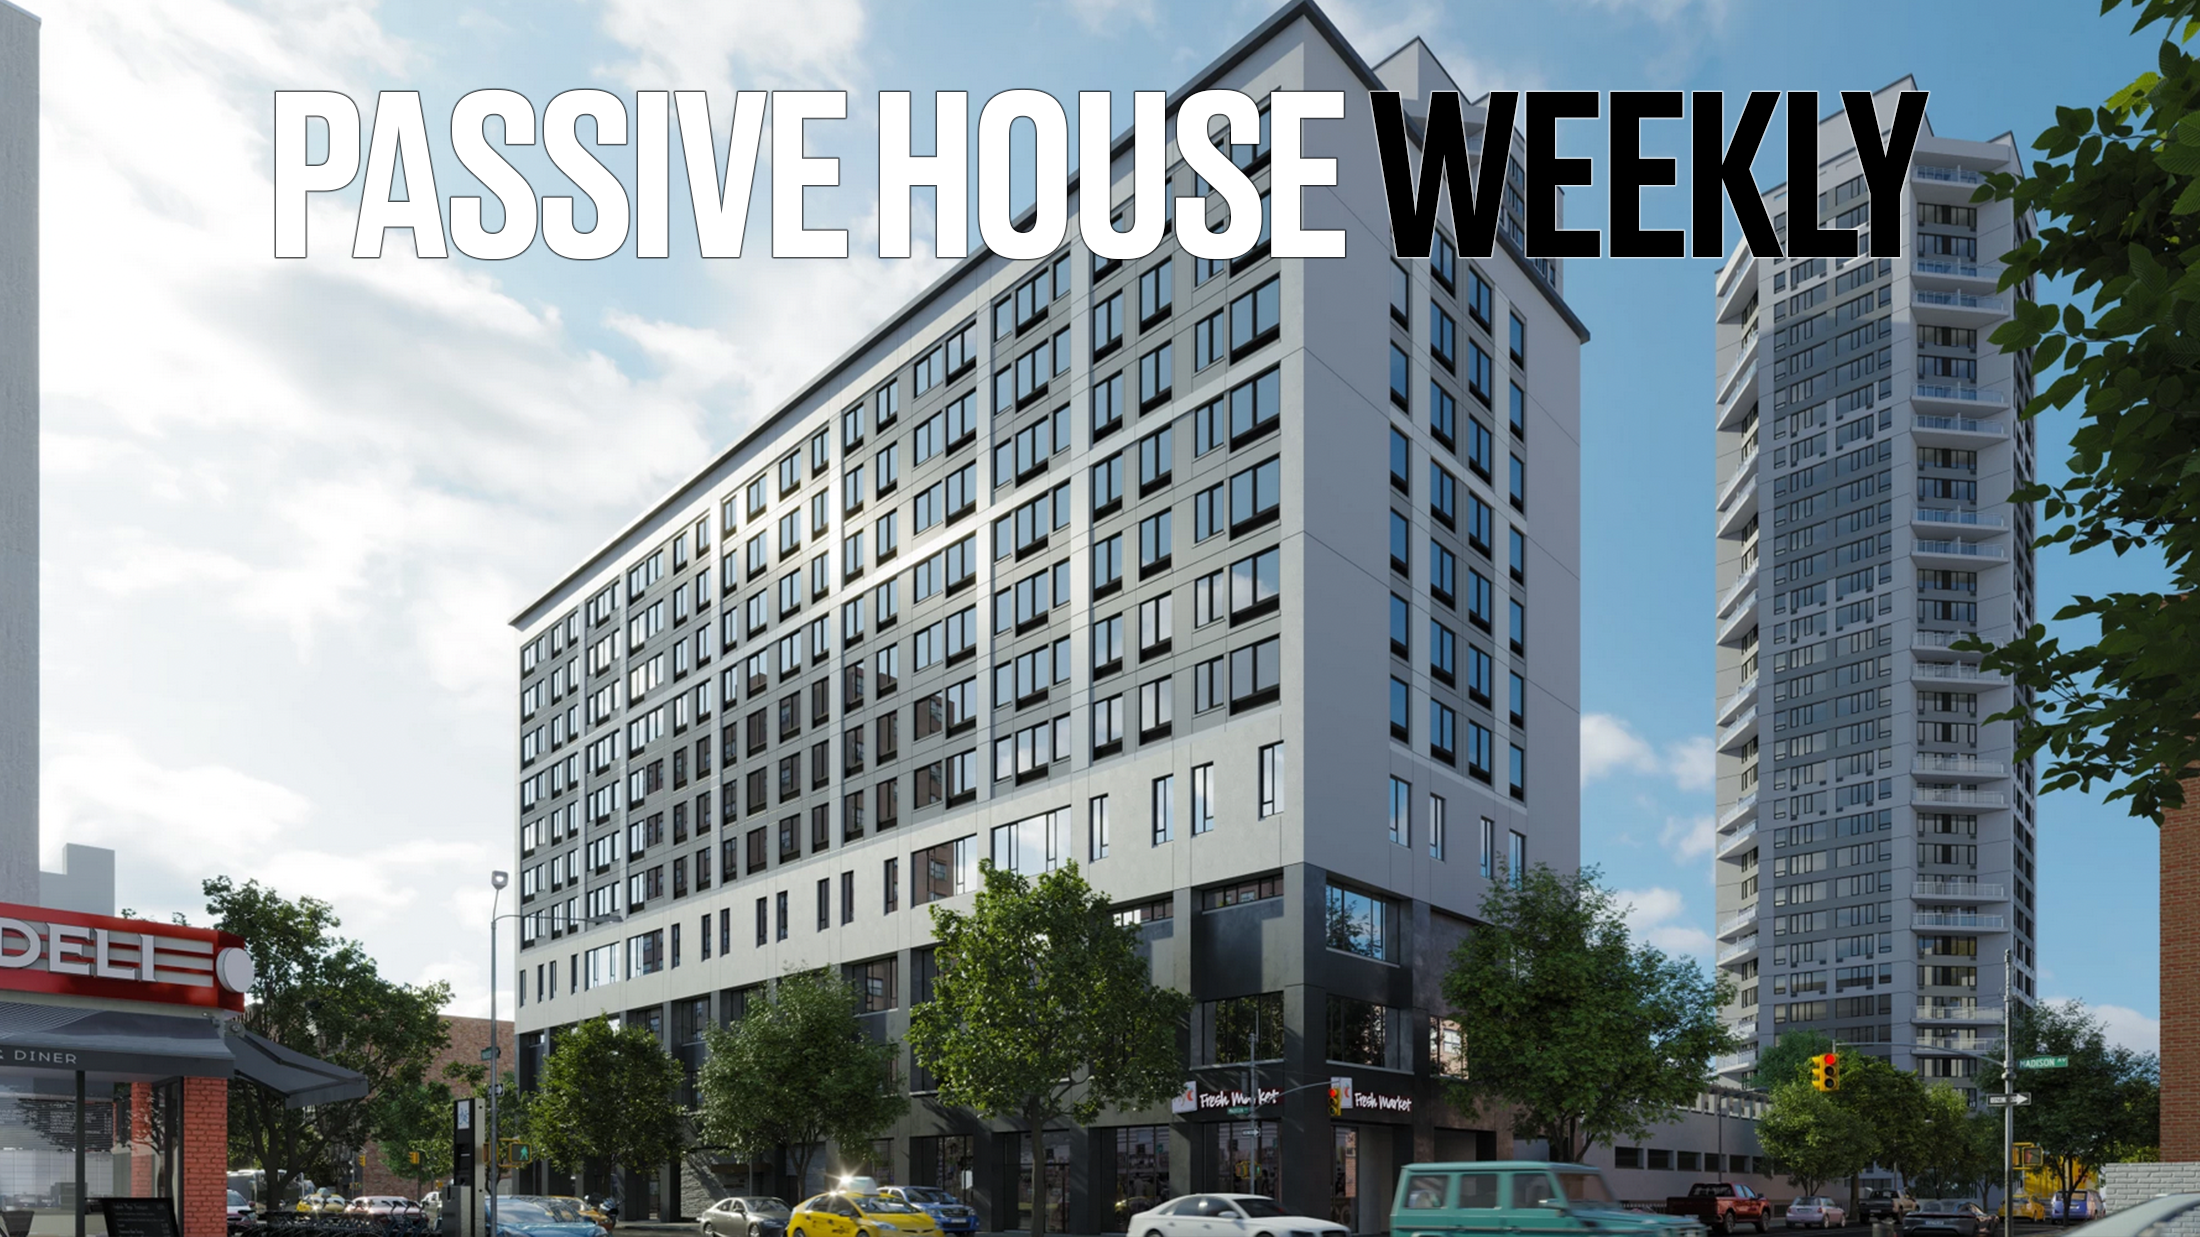 Passive House Weekly March 20th, 2022